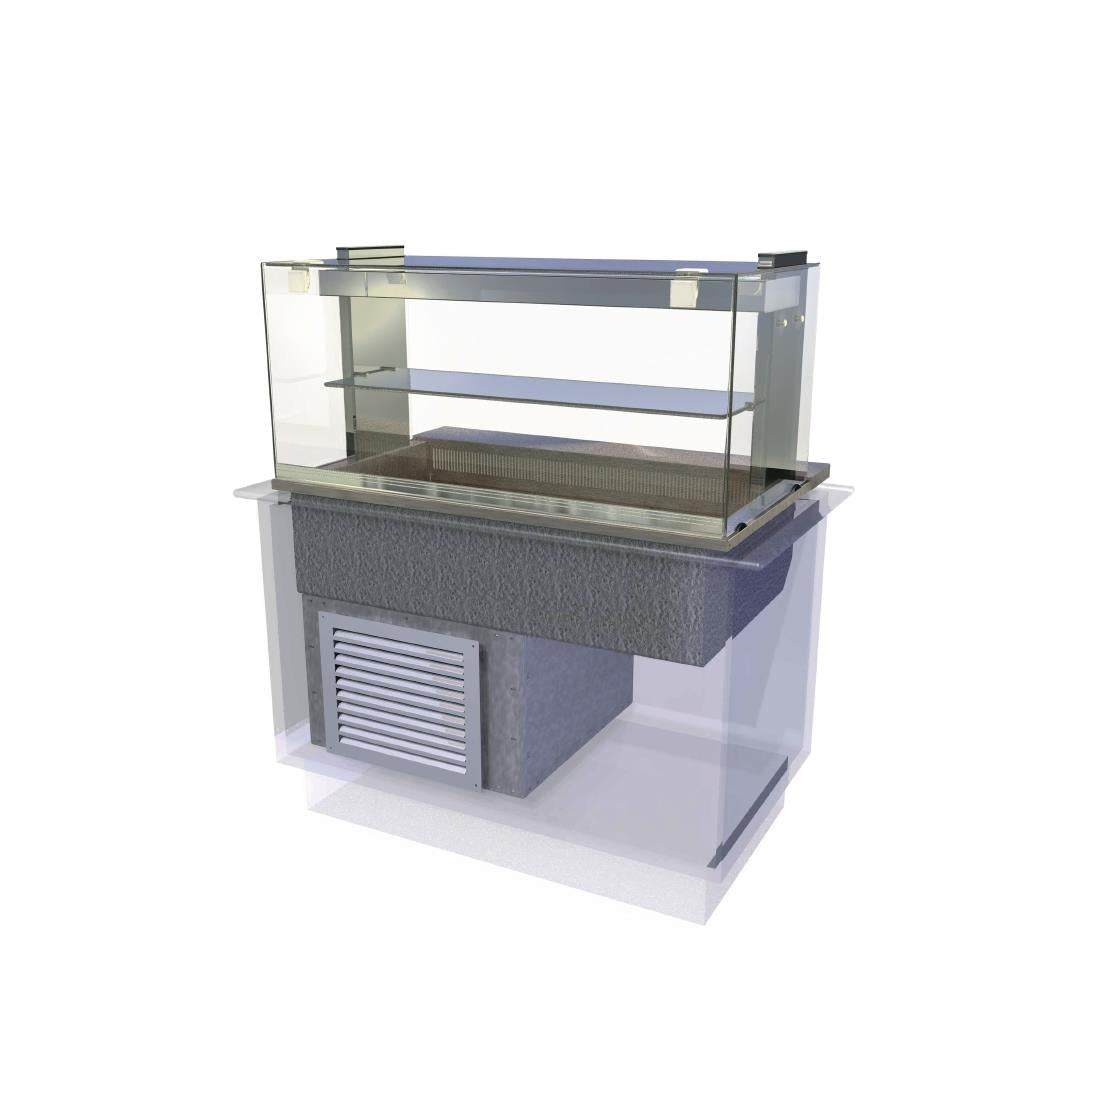 CW626 Kubus Drop In Chilled Deli Serve Over Counter 1175mm KCDL3HT JD Catering Equipment Solutions Ltd